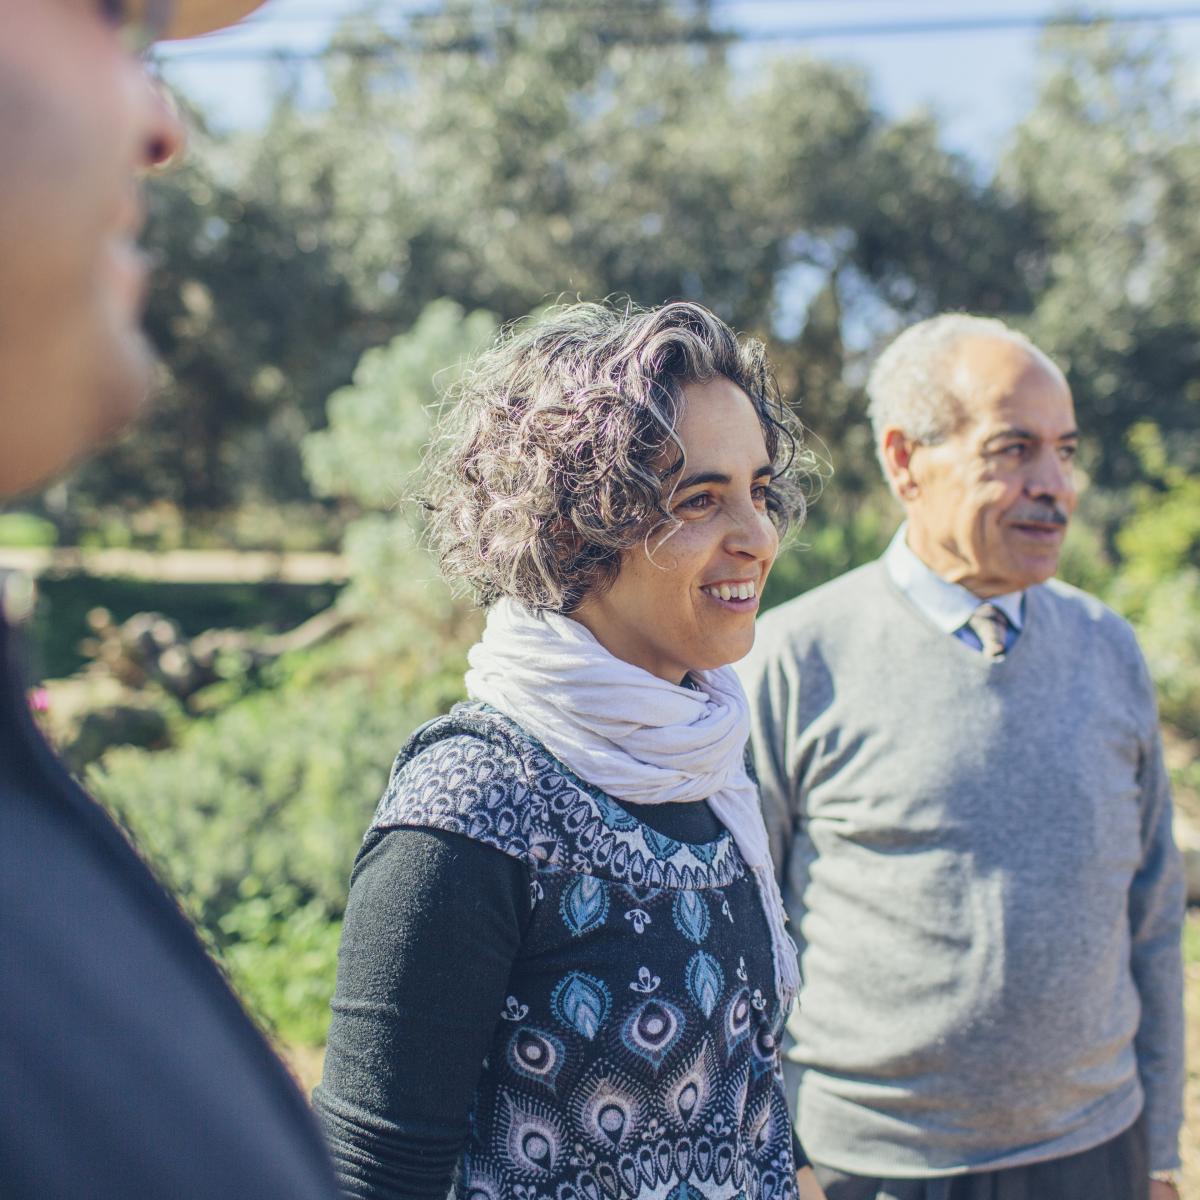 Ayala Noy Meir (left) and Khaled Hassan Hussein Yaseen Al-Juneidi (right) walk through an olive grove together.